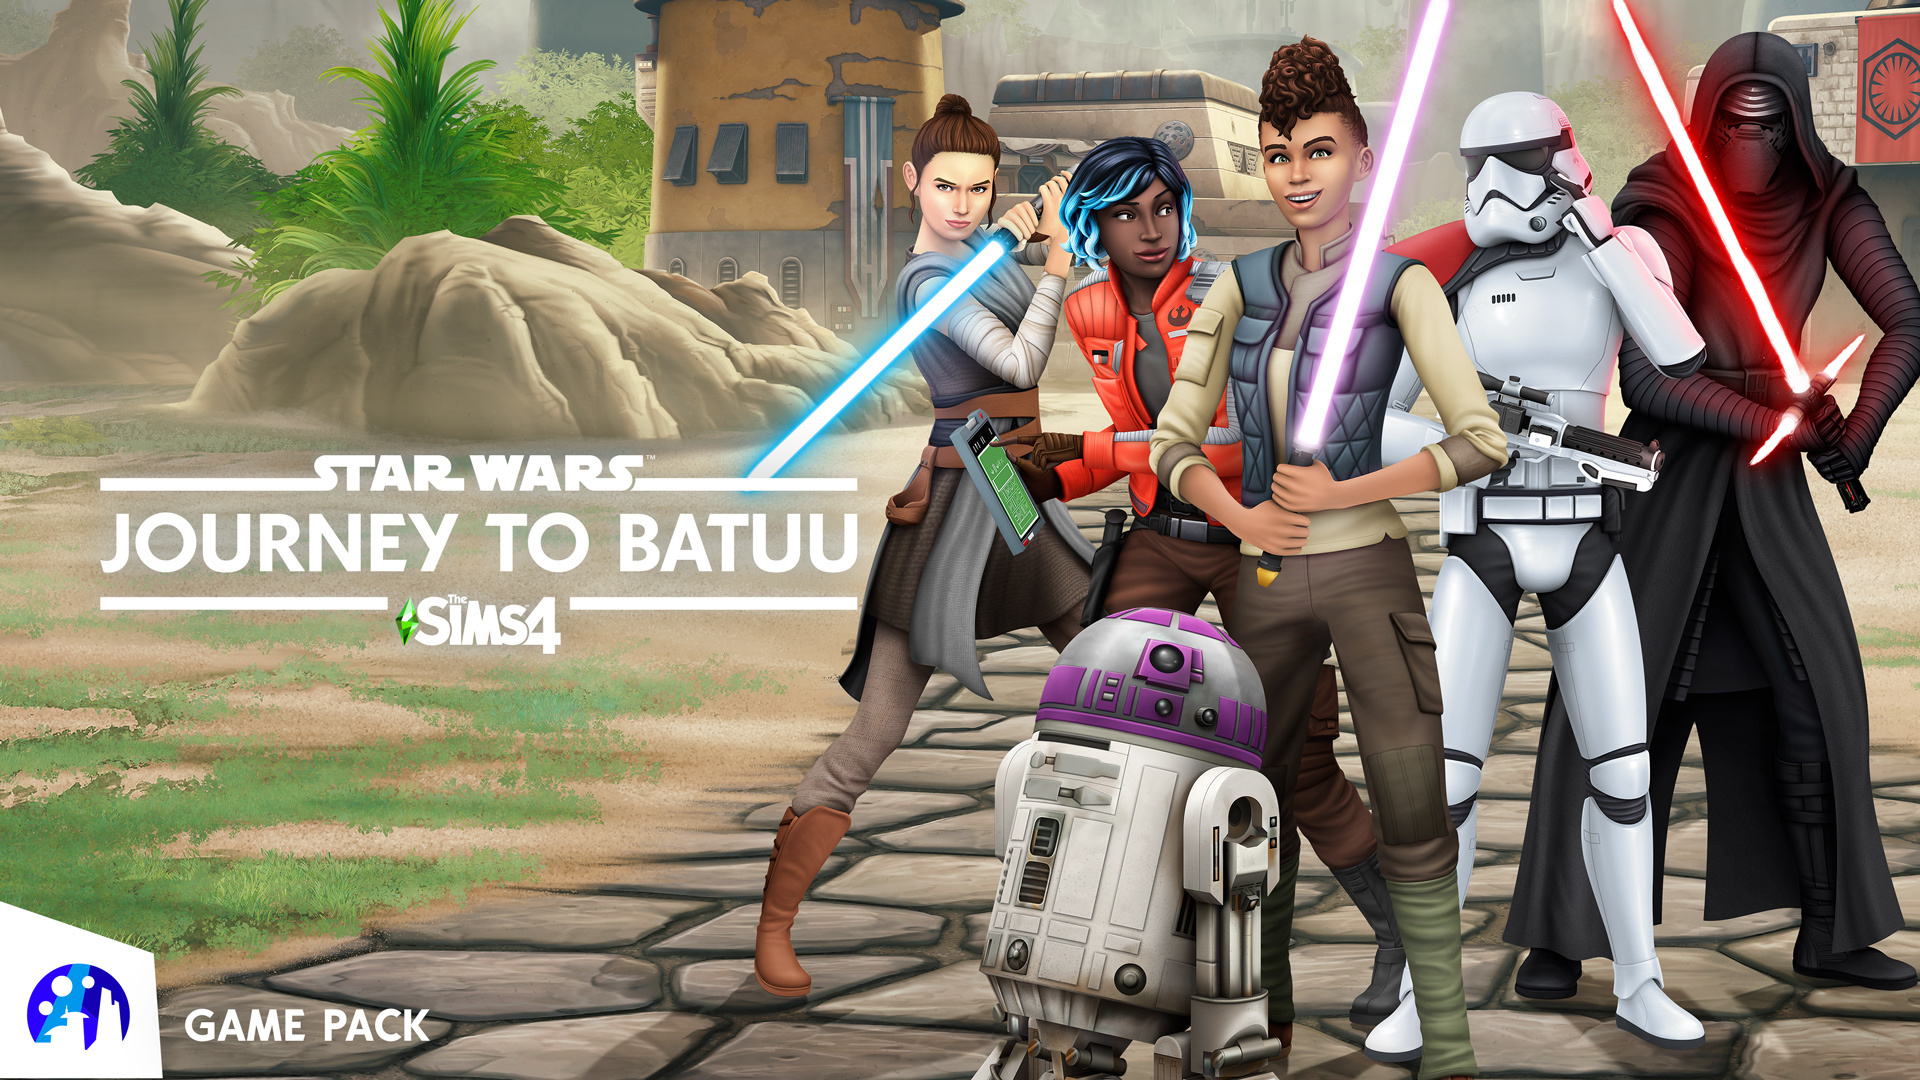 ‘Sims 4’ brings the Force of ‘Star Wars’ with ‘Lunge to Batuu’ expansion